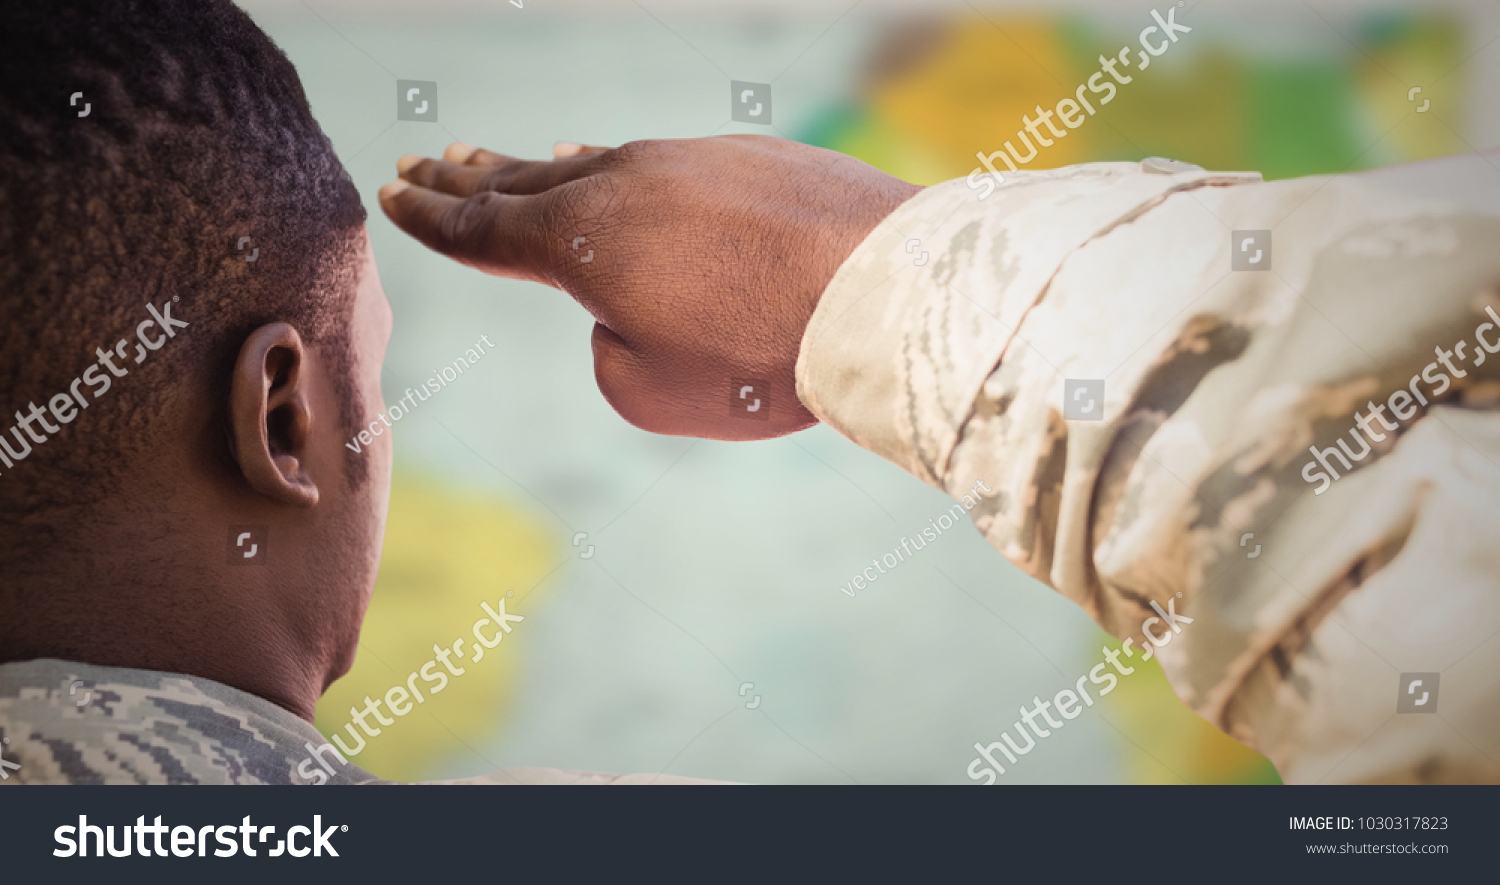 Digital composite of Back of soldier saluting against blurry map #1030317823